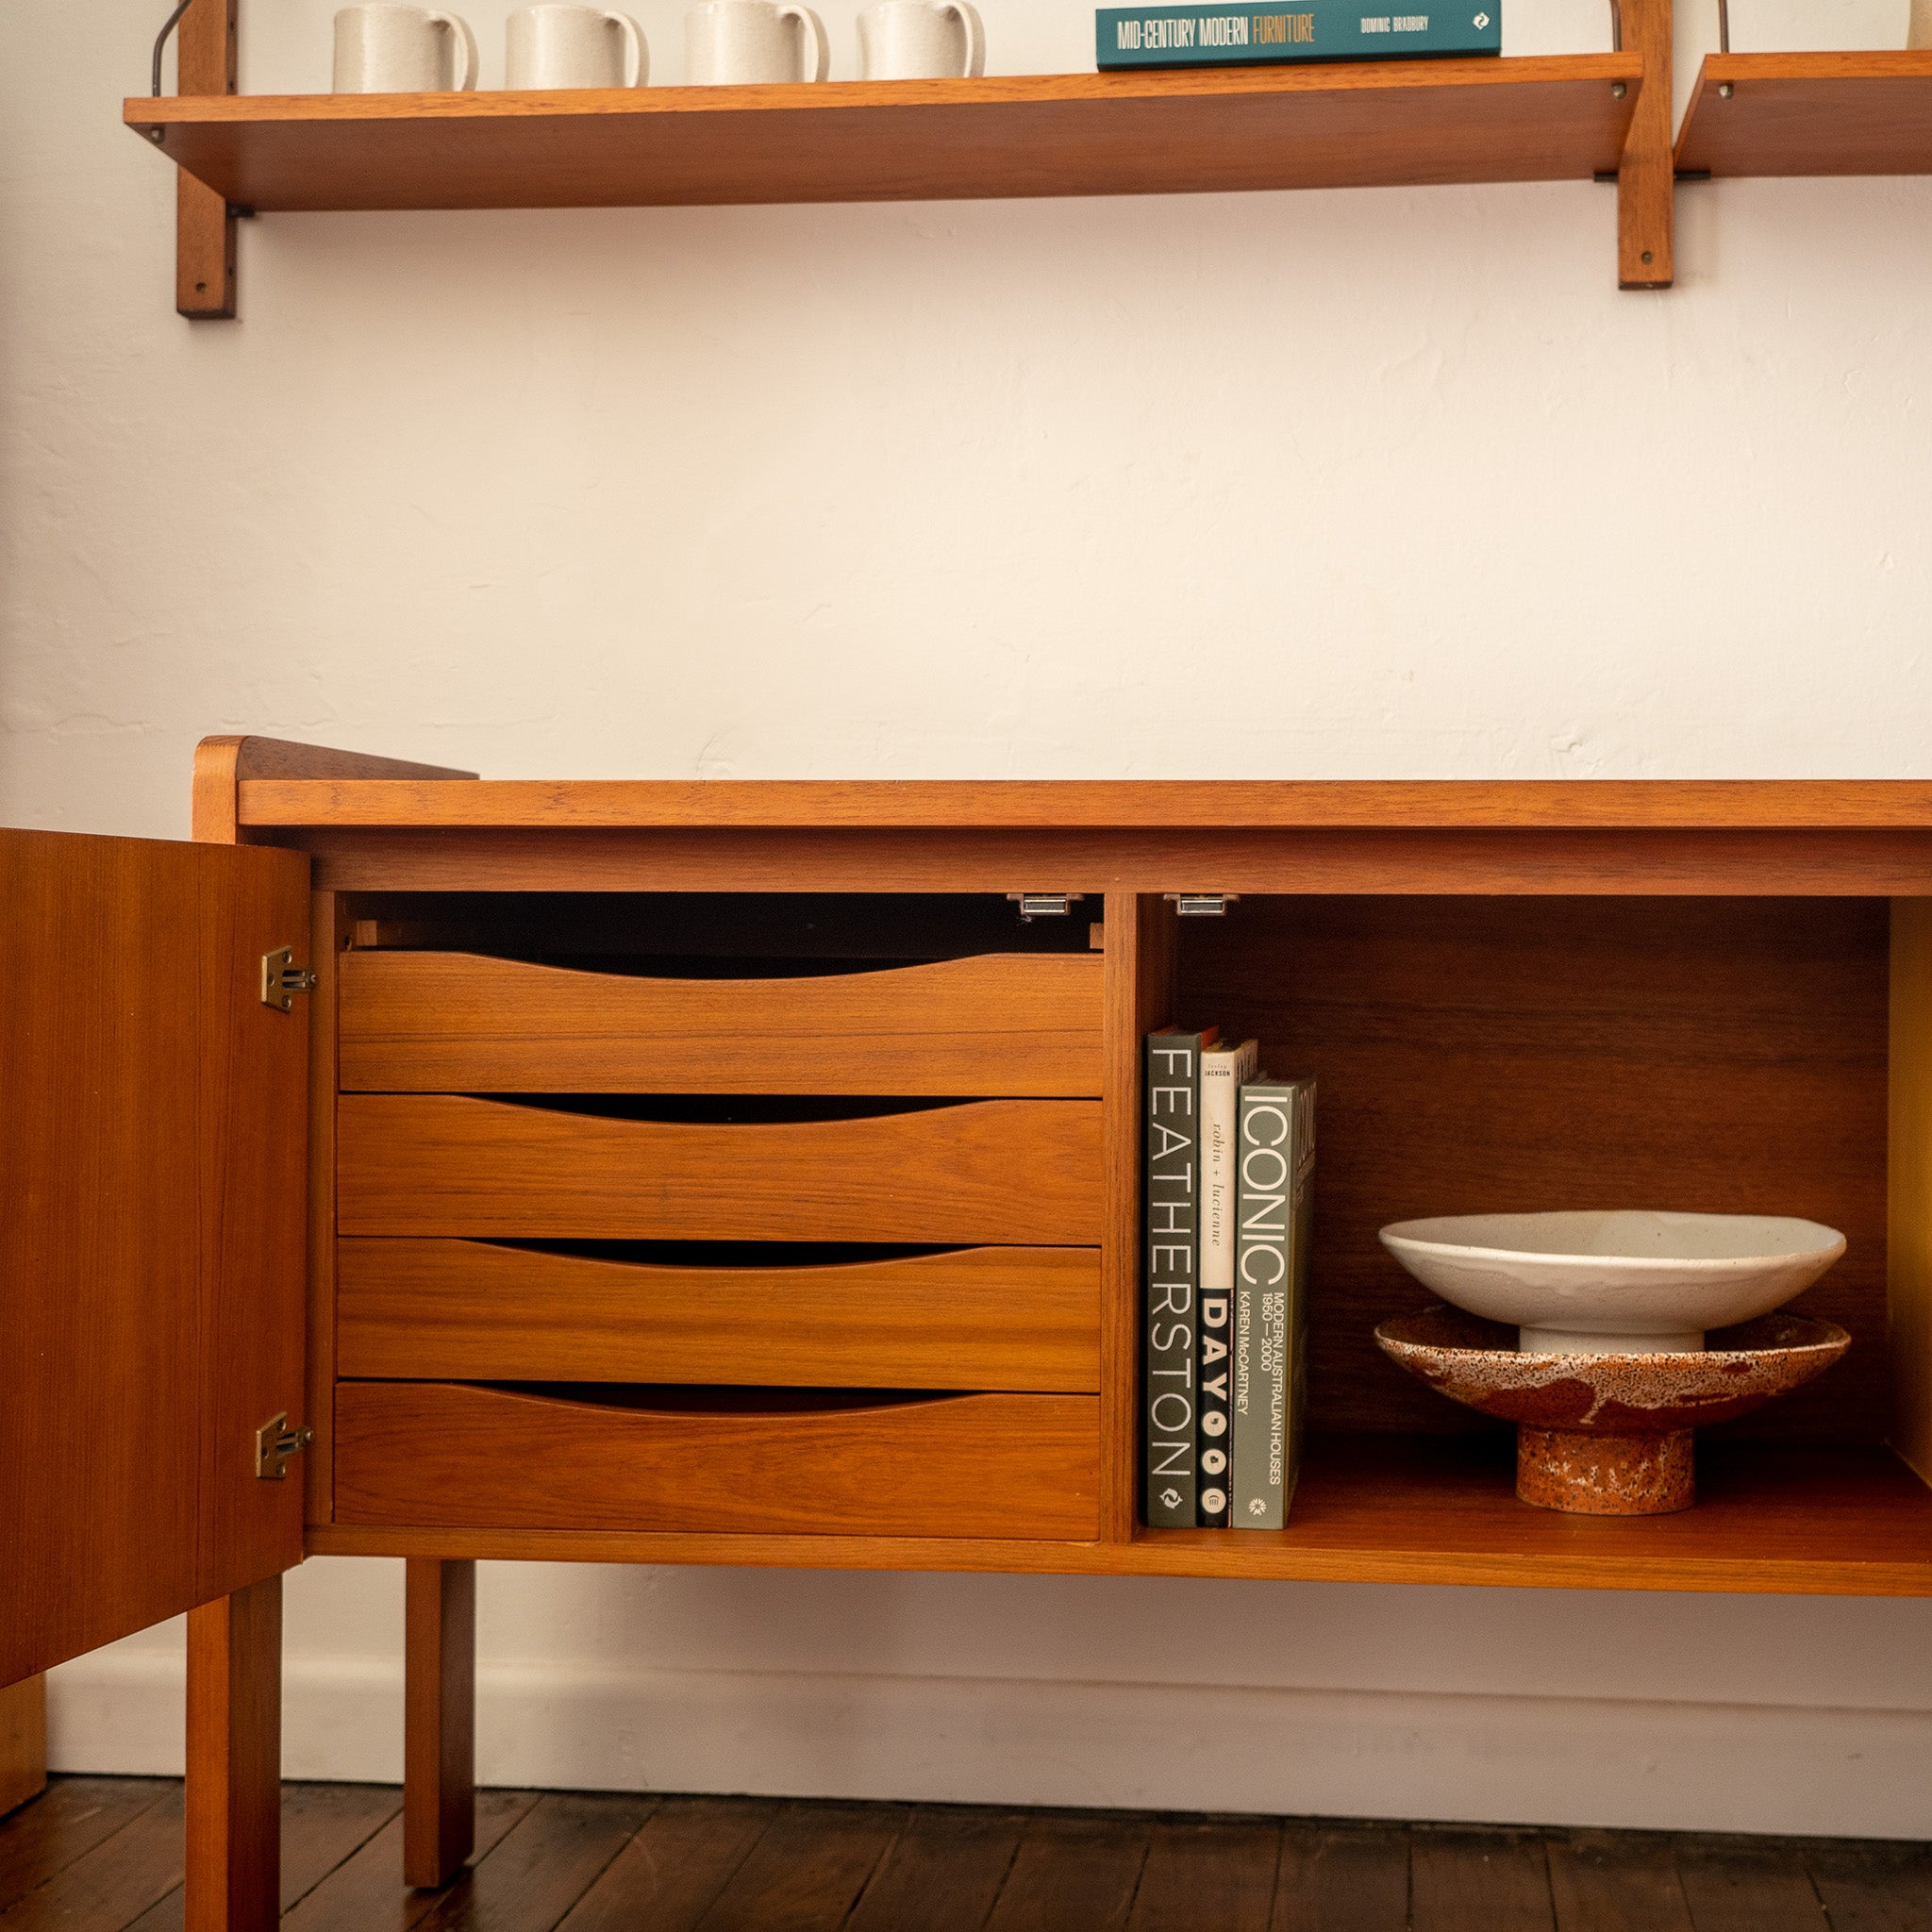 Sideboard drawers and space